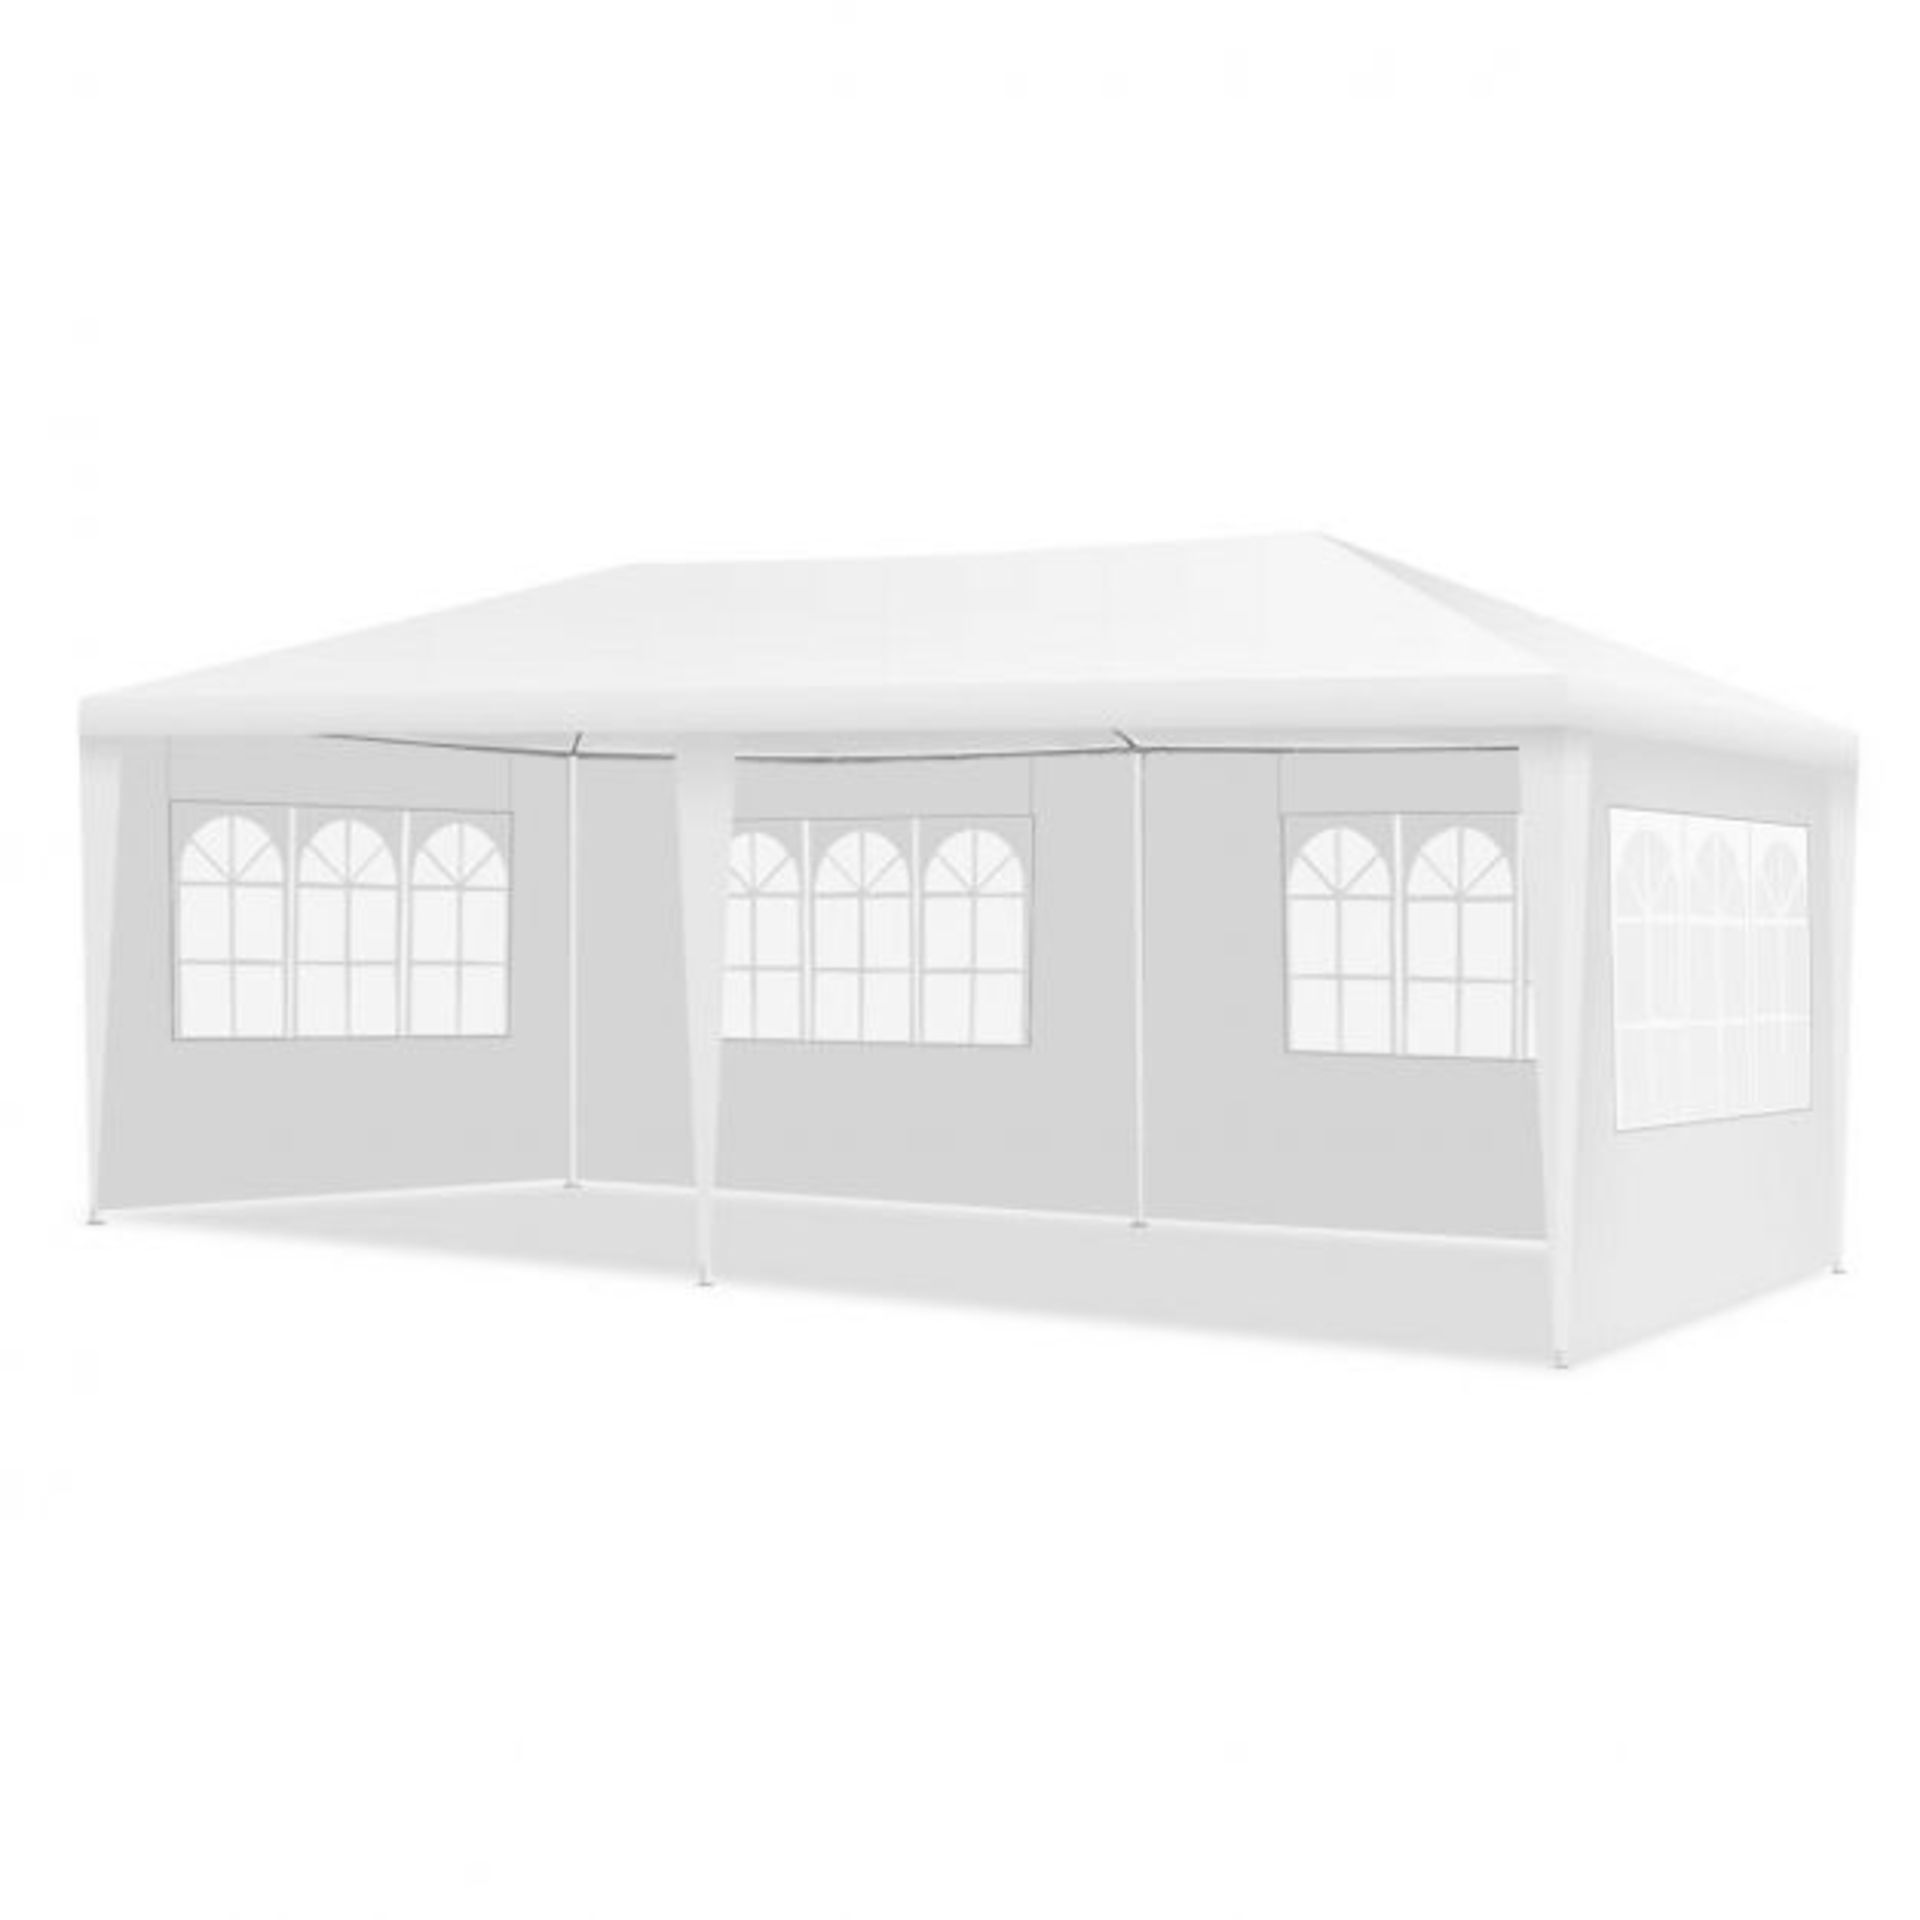 3 m x 6 m Garden Gazebo Party Canopy Tent Waterproof. - SR37. The frame of the tent is constructed - Image 2 of 2